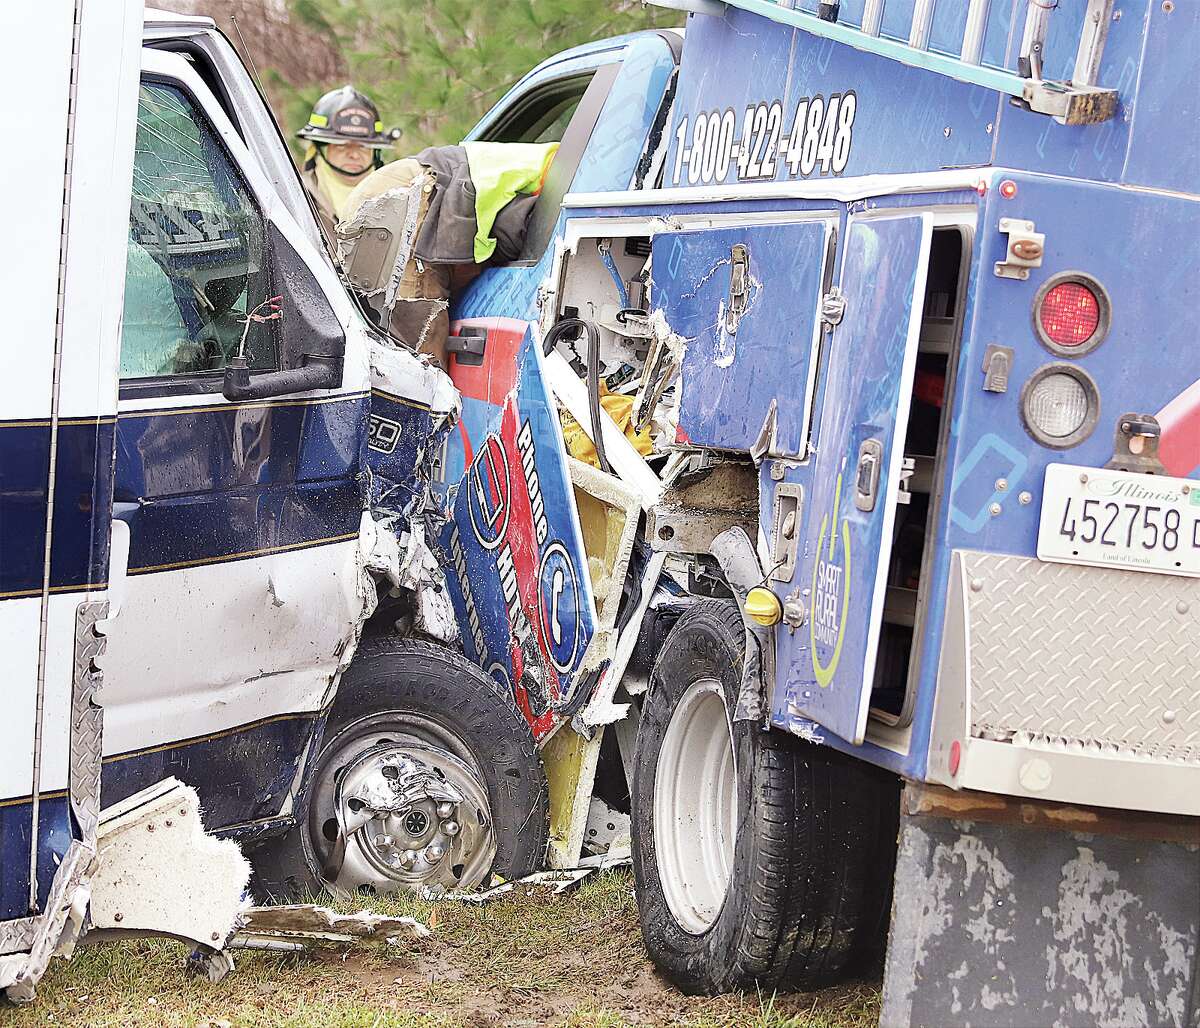 John Badman|The Telegraph Both a Bunker Hill Area Ambulance Service rig and a work truck were extensively damaged in a Thursday morning crash.